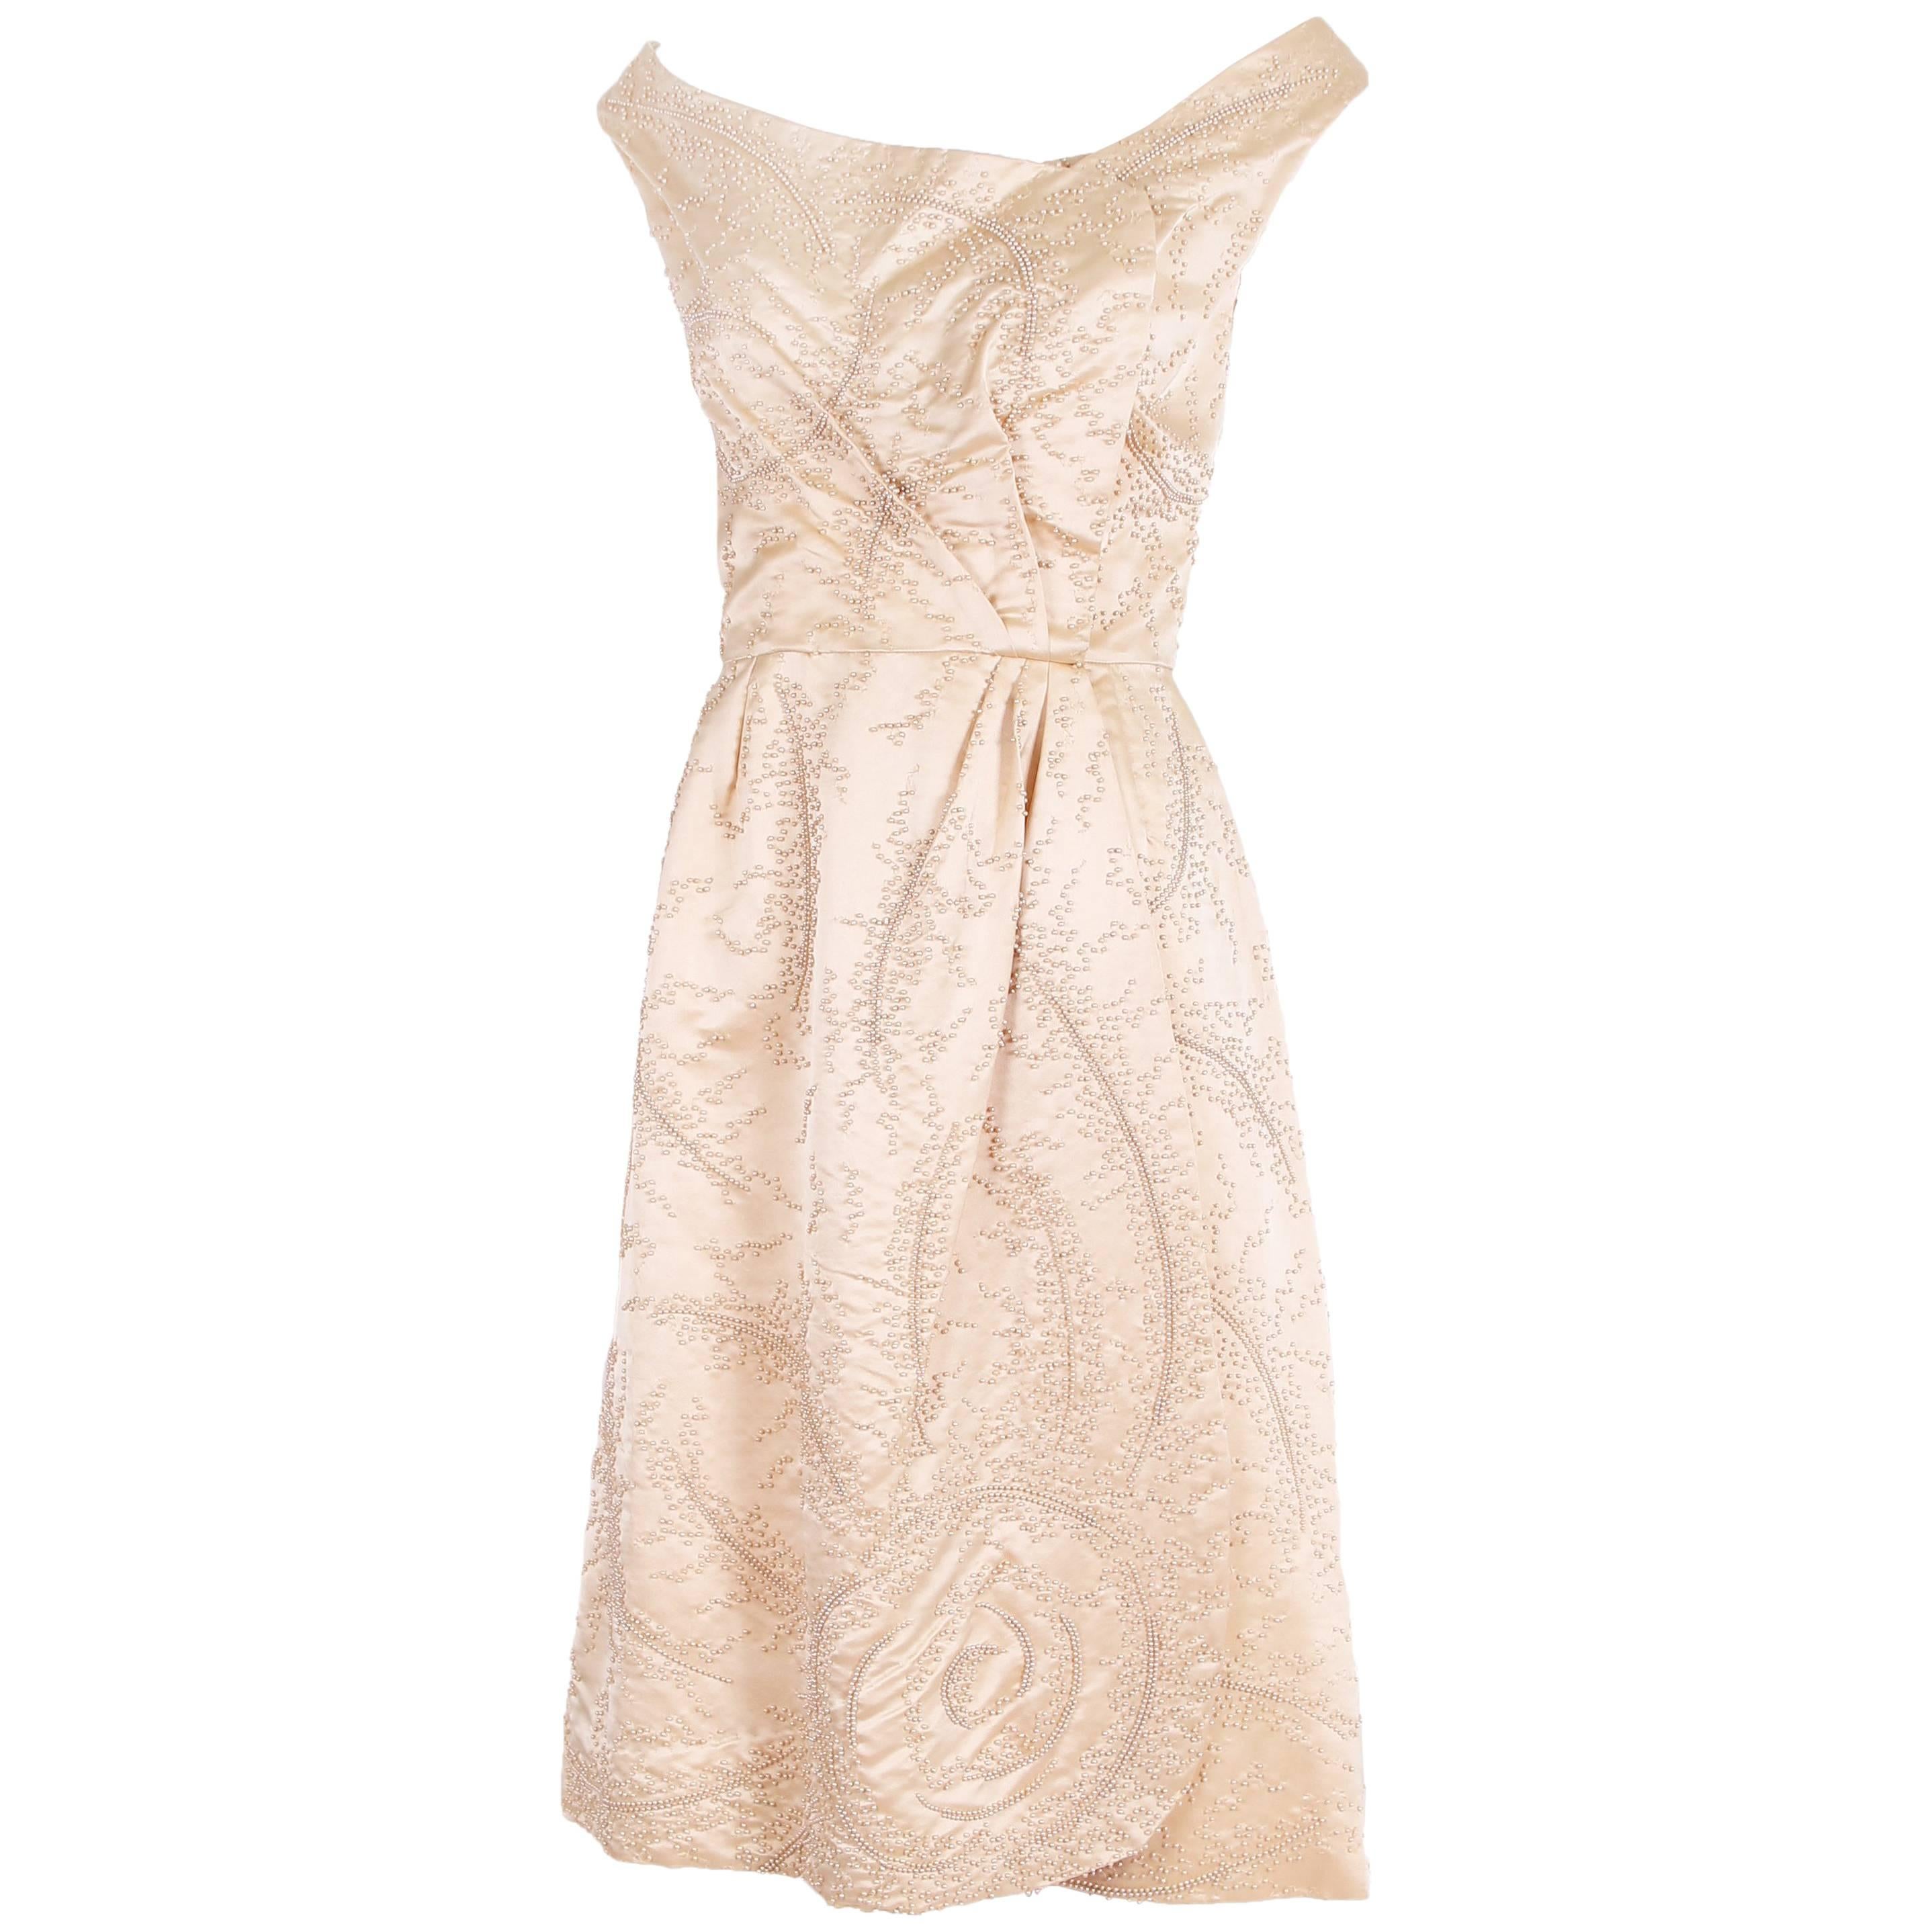 Ceil Chapman Champagne-Colored Satin Beaded Cocktail Dress Ca. 1965 For Sale